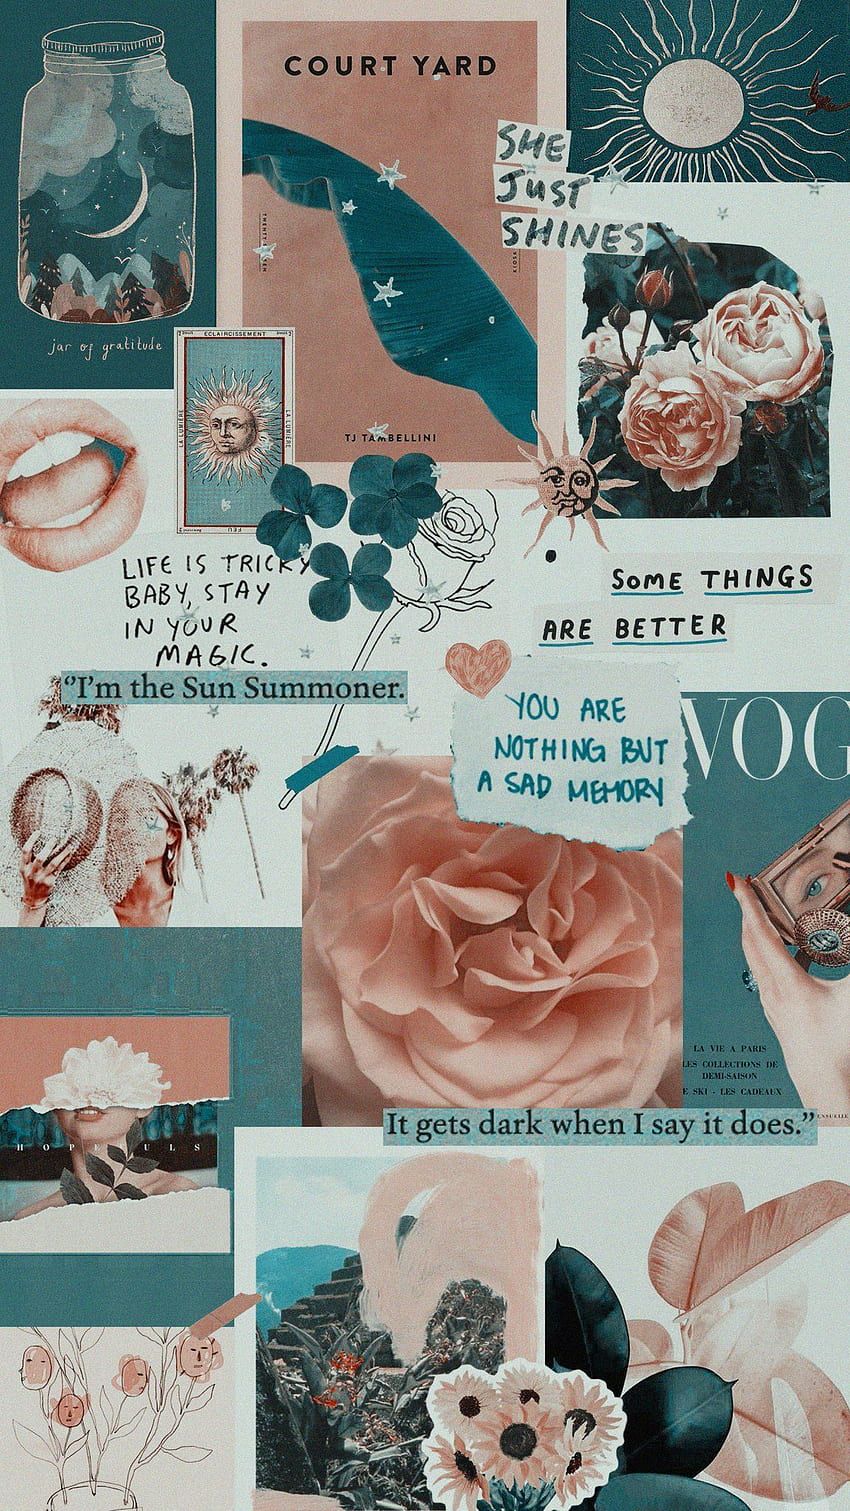 A collage of vintage aesthetic images, including flowers, a sun, and a quote. - Retro